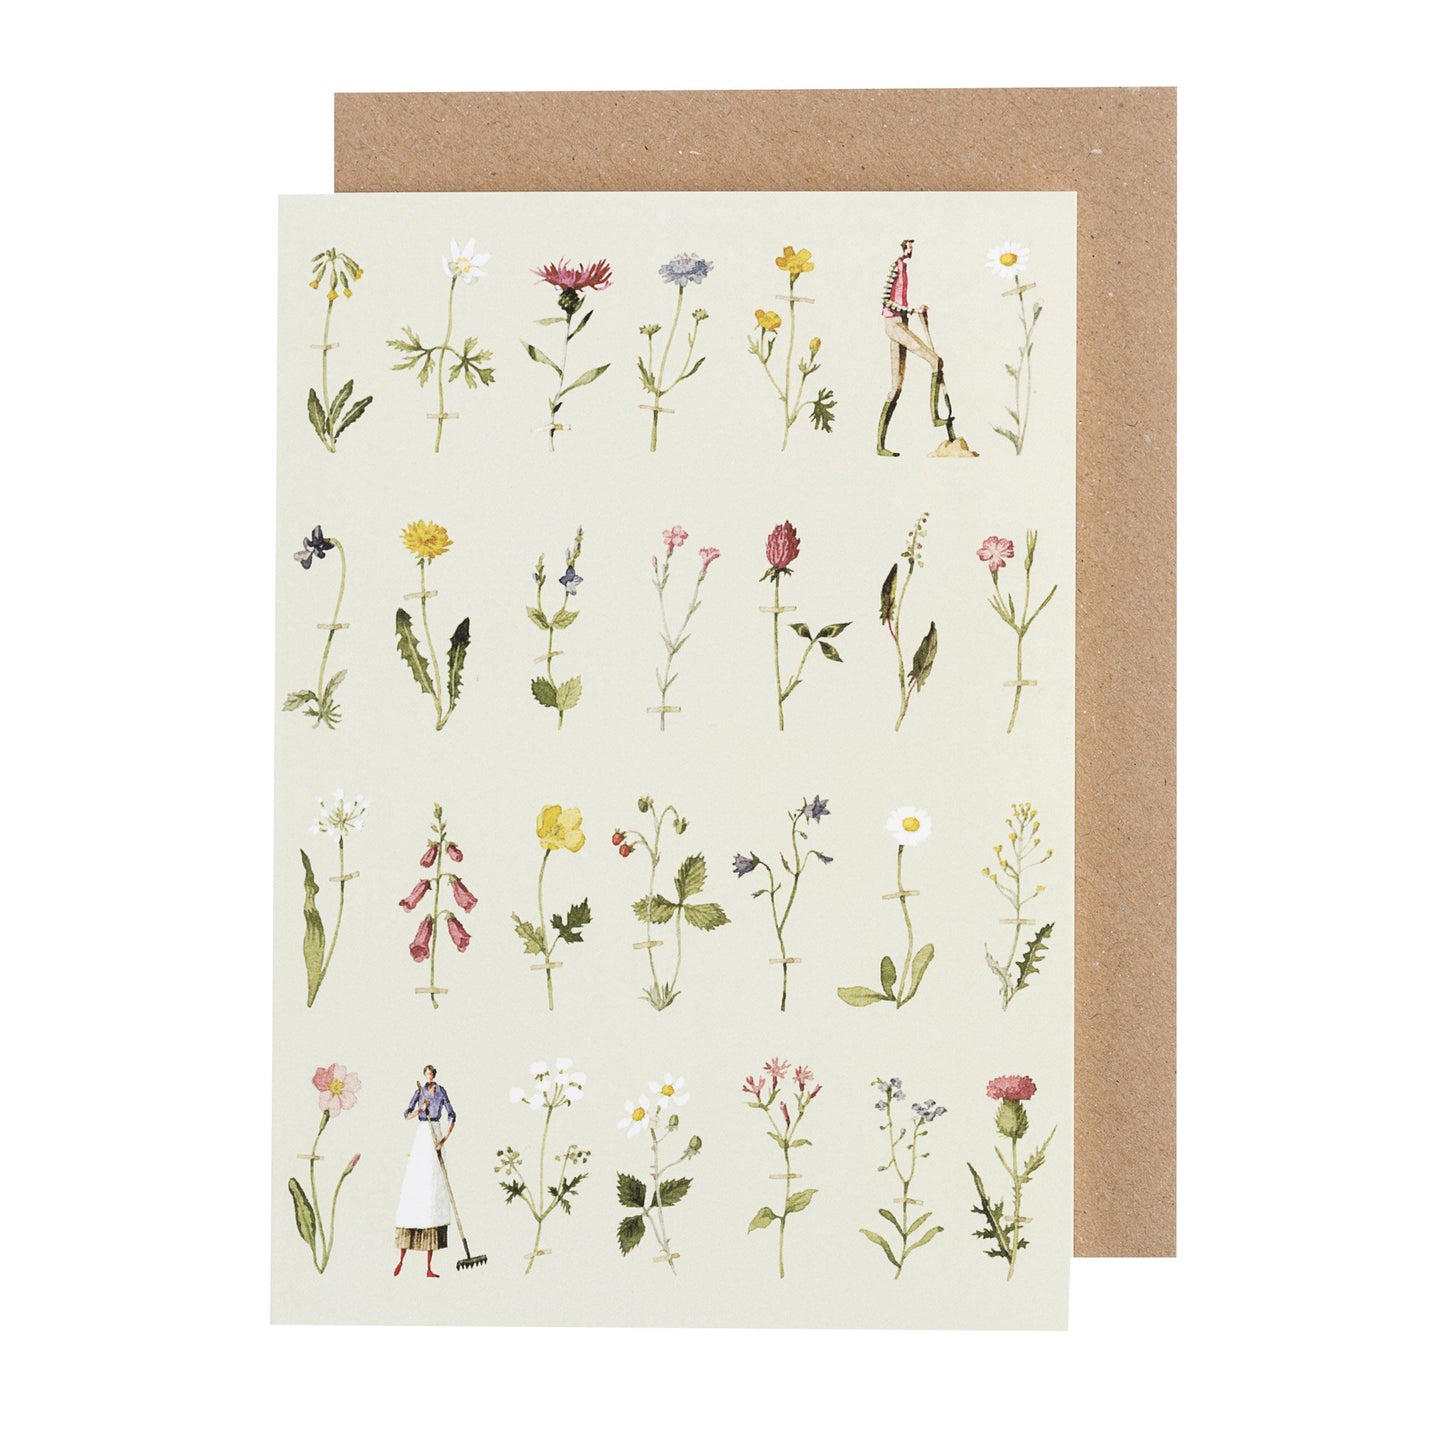 environmentally sustainable paper, compostable packaging, recycled paper, made in england, illustration, wild flowers, flowers